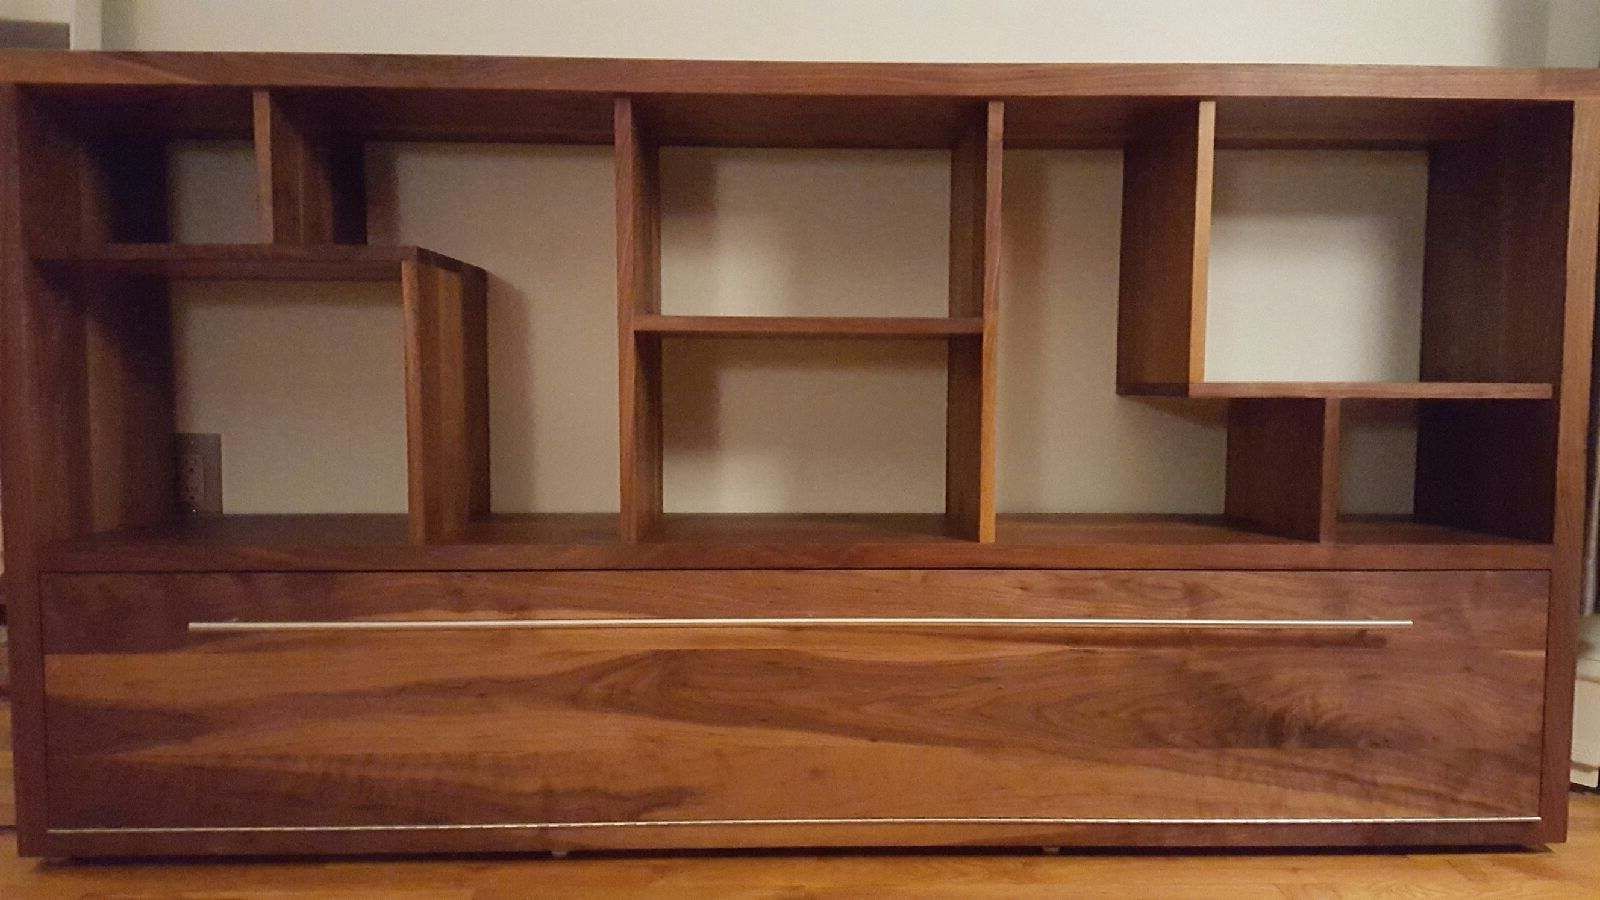 Hand Crafted Solid Walnut Entertainment Centerinsight Woodworking Llc |  Custommade Pertaining To Walnut Entertainment Centers (Gallery 6 of 20)